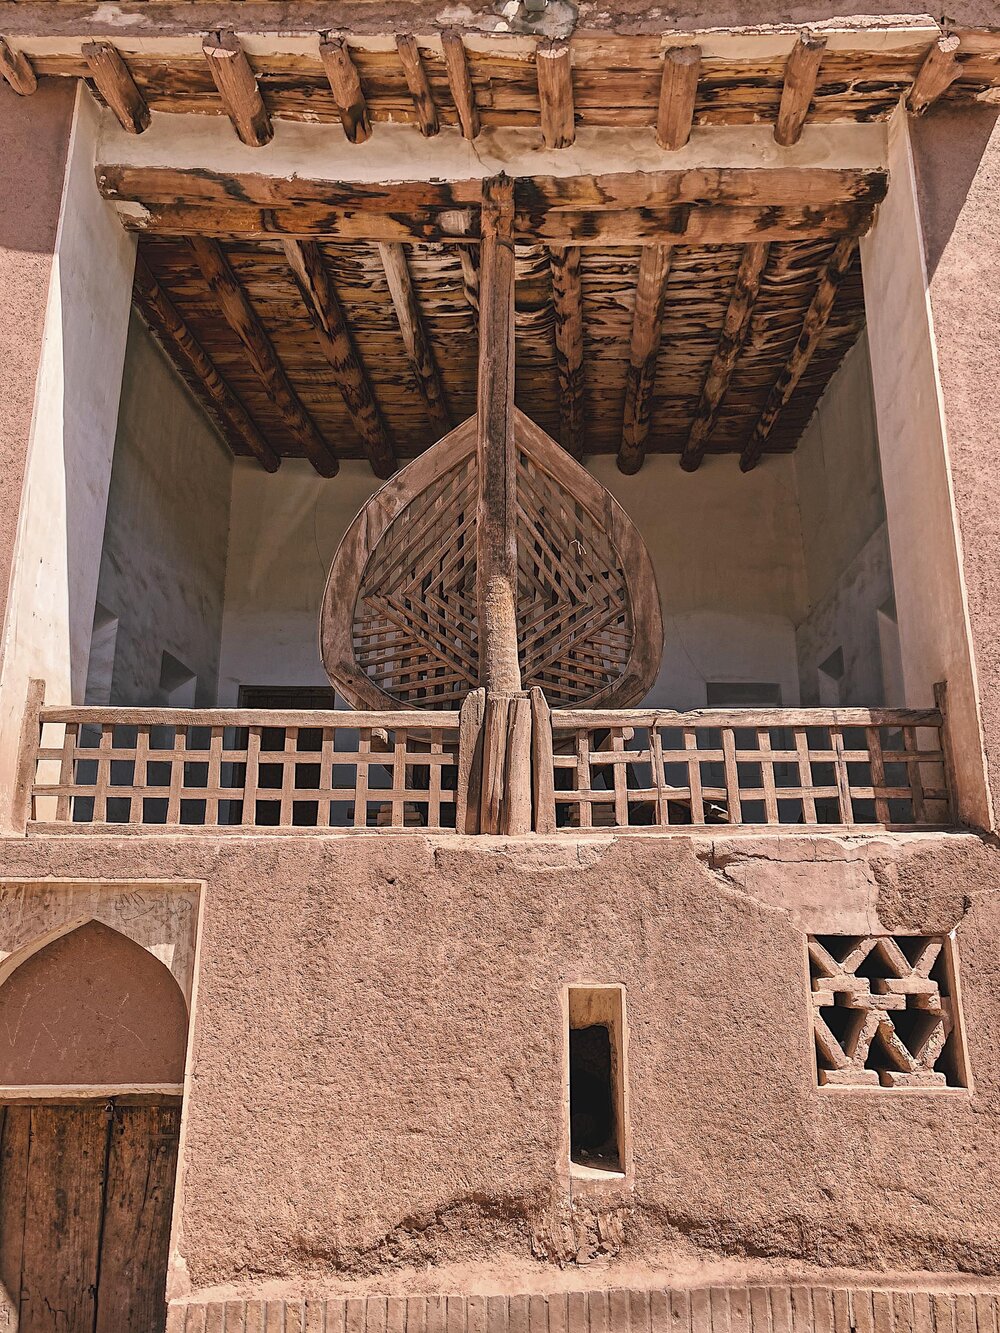 Streets of Abyaneh, Iran